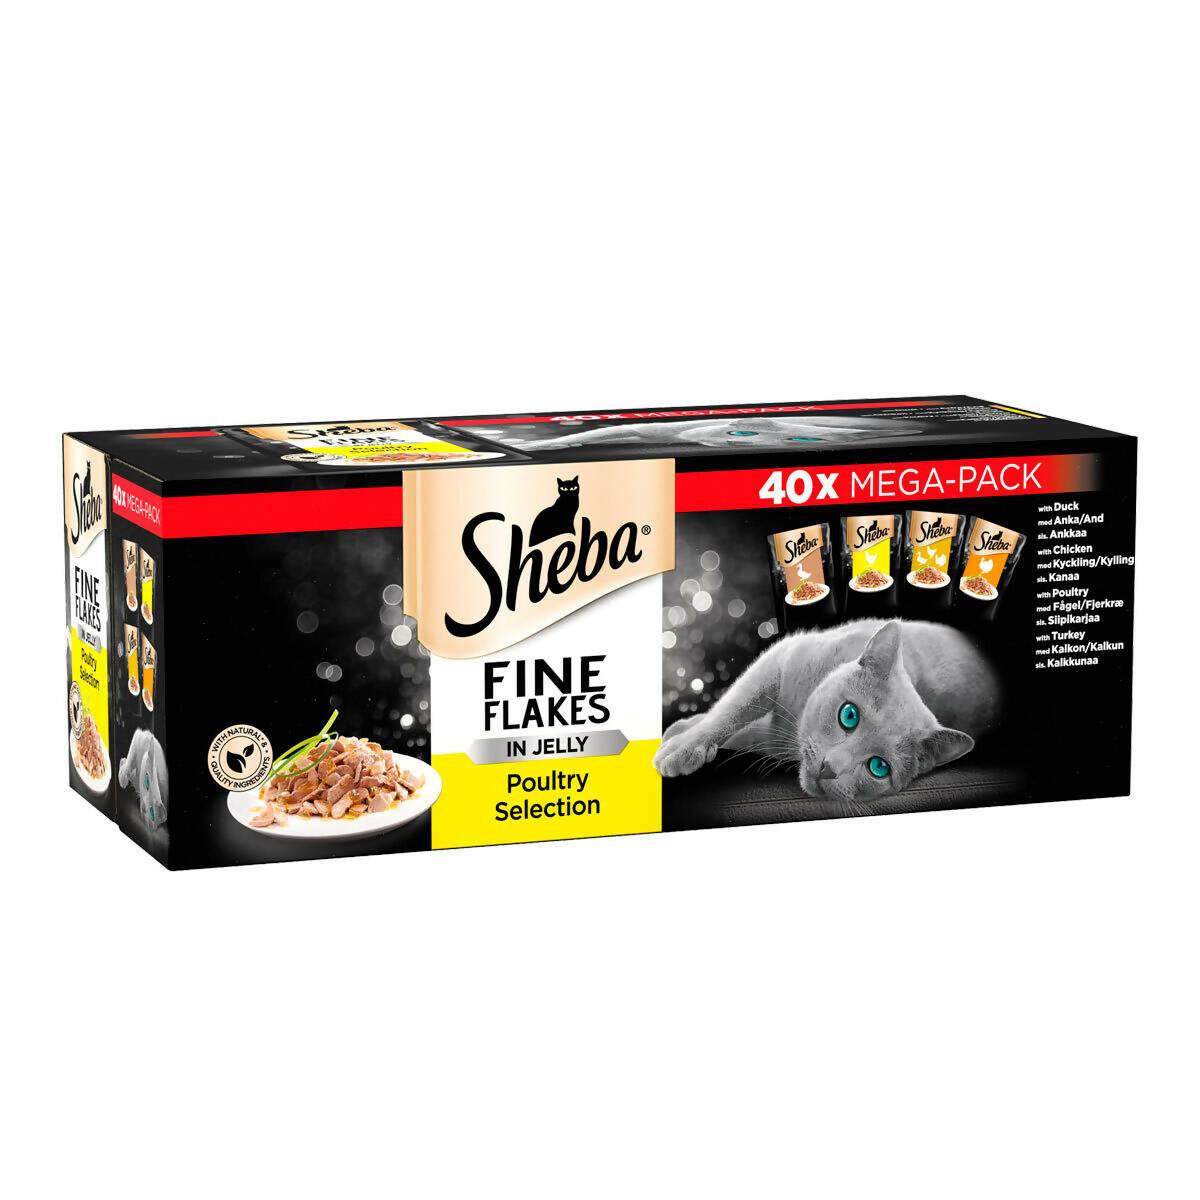 Sheba Poultry Selection Cat Food, 40 x 85g Grocery & Household Costco UK   